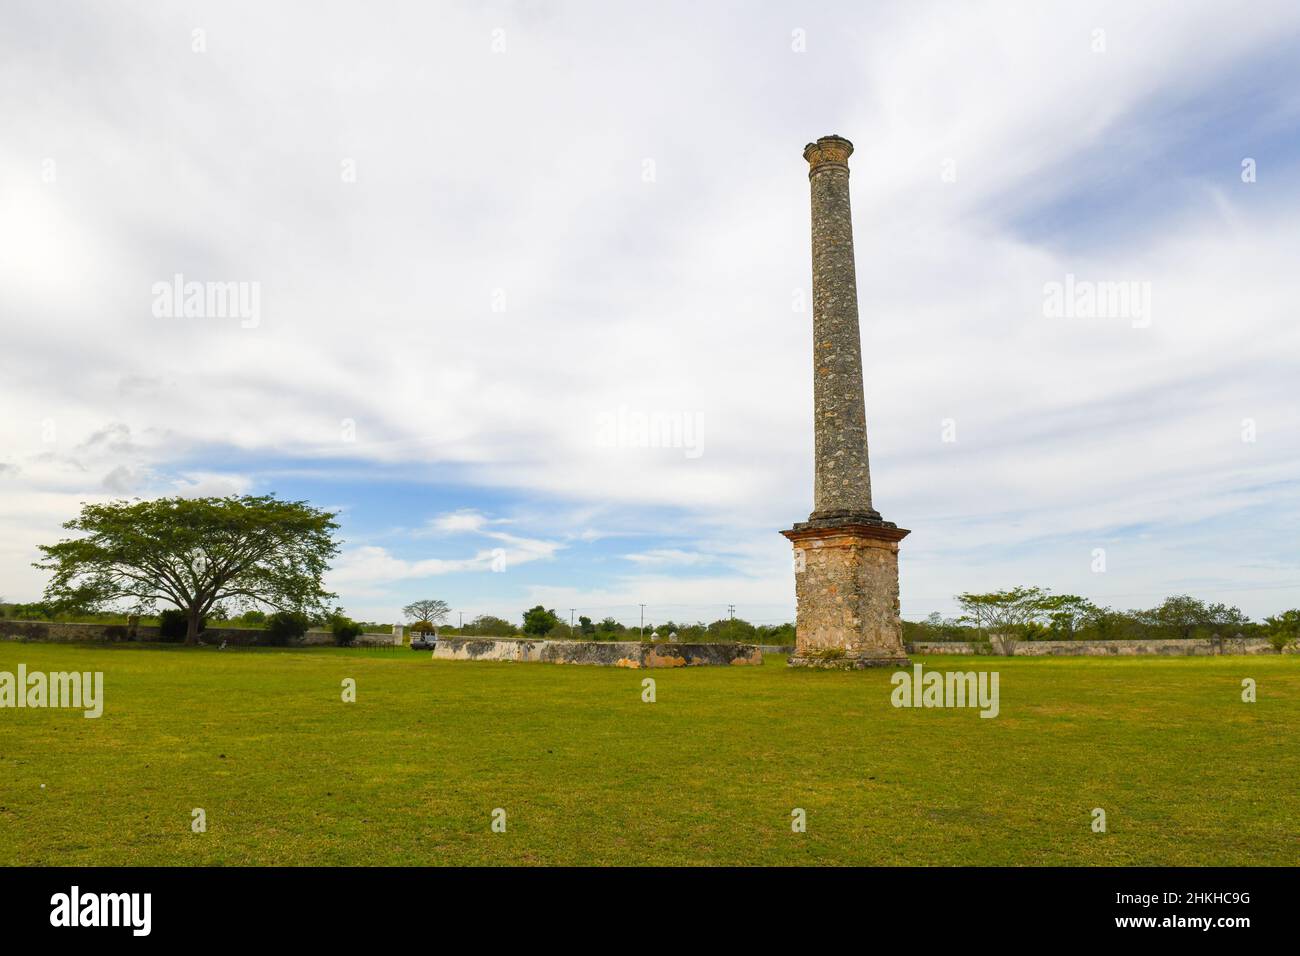 The chimney of Hacienda Yaxcopoil,of the small processing plant on the grounds of the property that used to be a Henequen producing Hacienda, Yucatan , Mexico Stock Photo